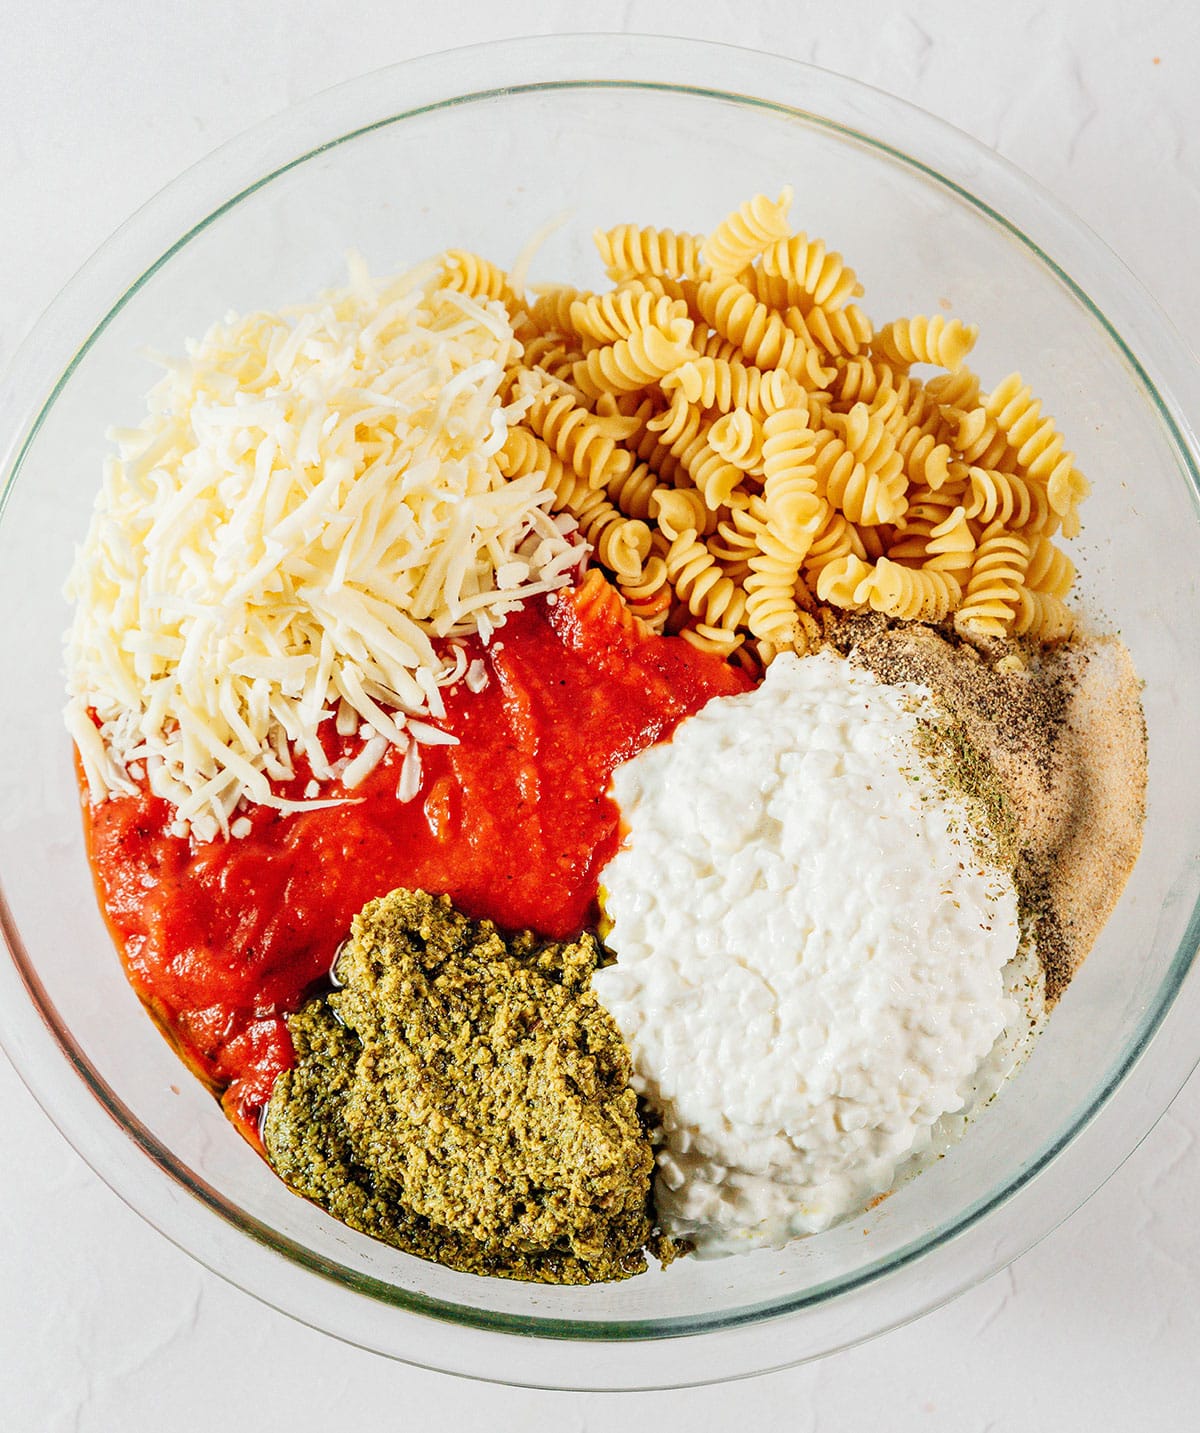 Ingredients for rotini bake in a bowl.